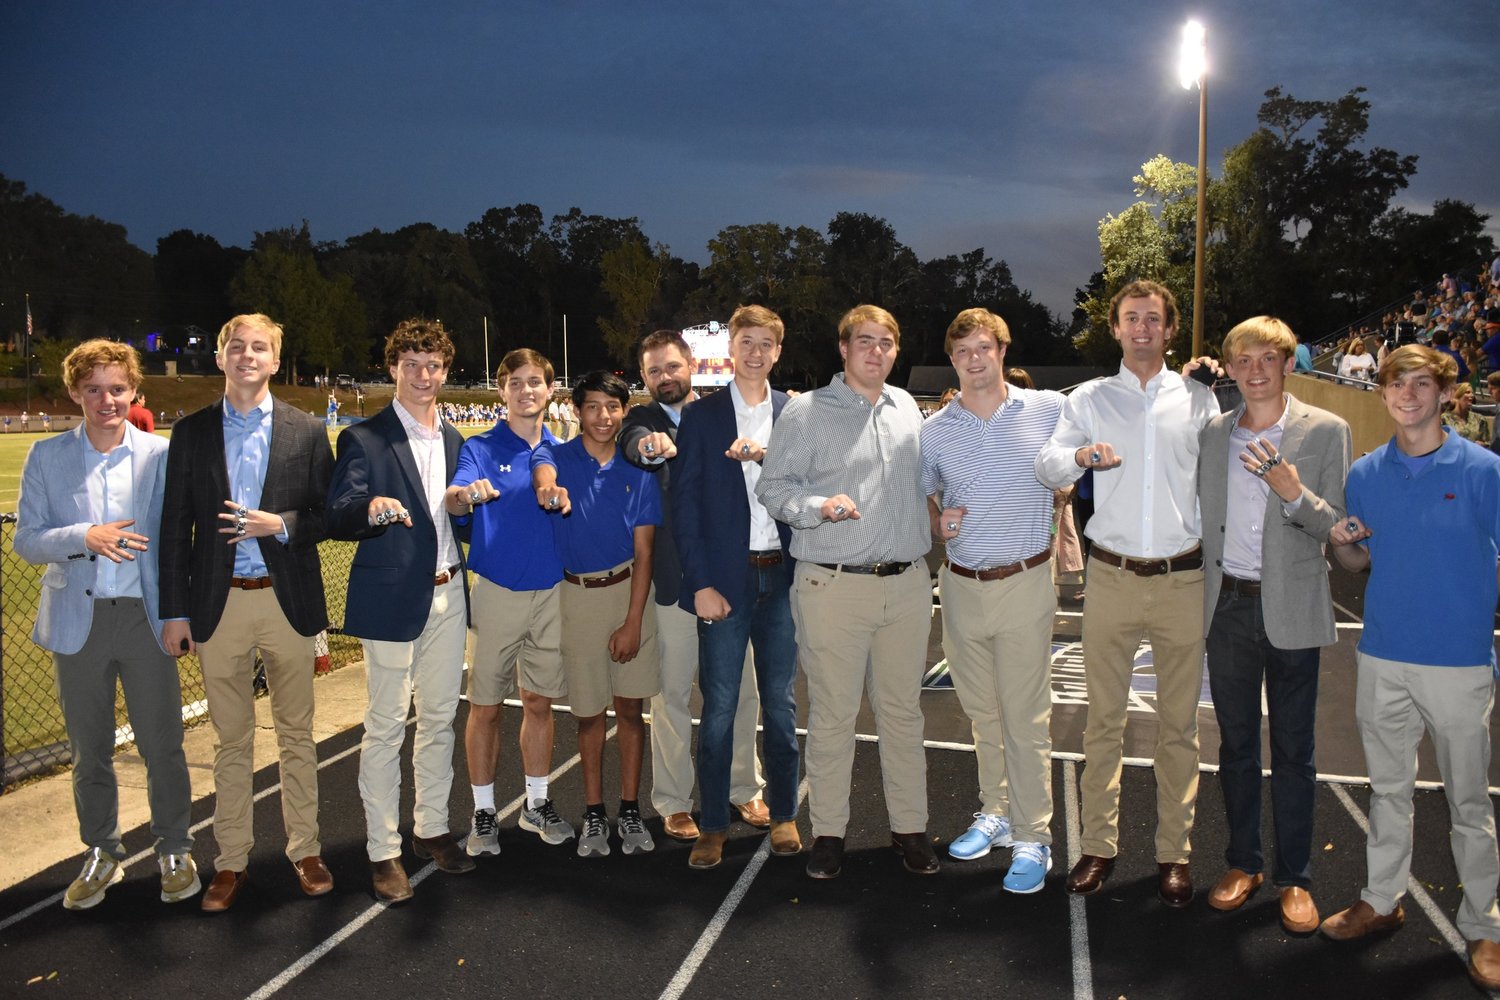 Admiral track and field athletes received their state championship rings during a ceremony before Friday’s football game and were honored for their contributions to the Class 3A team title.